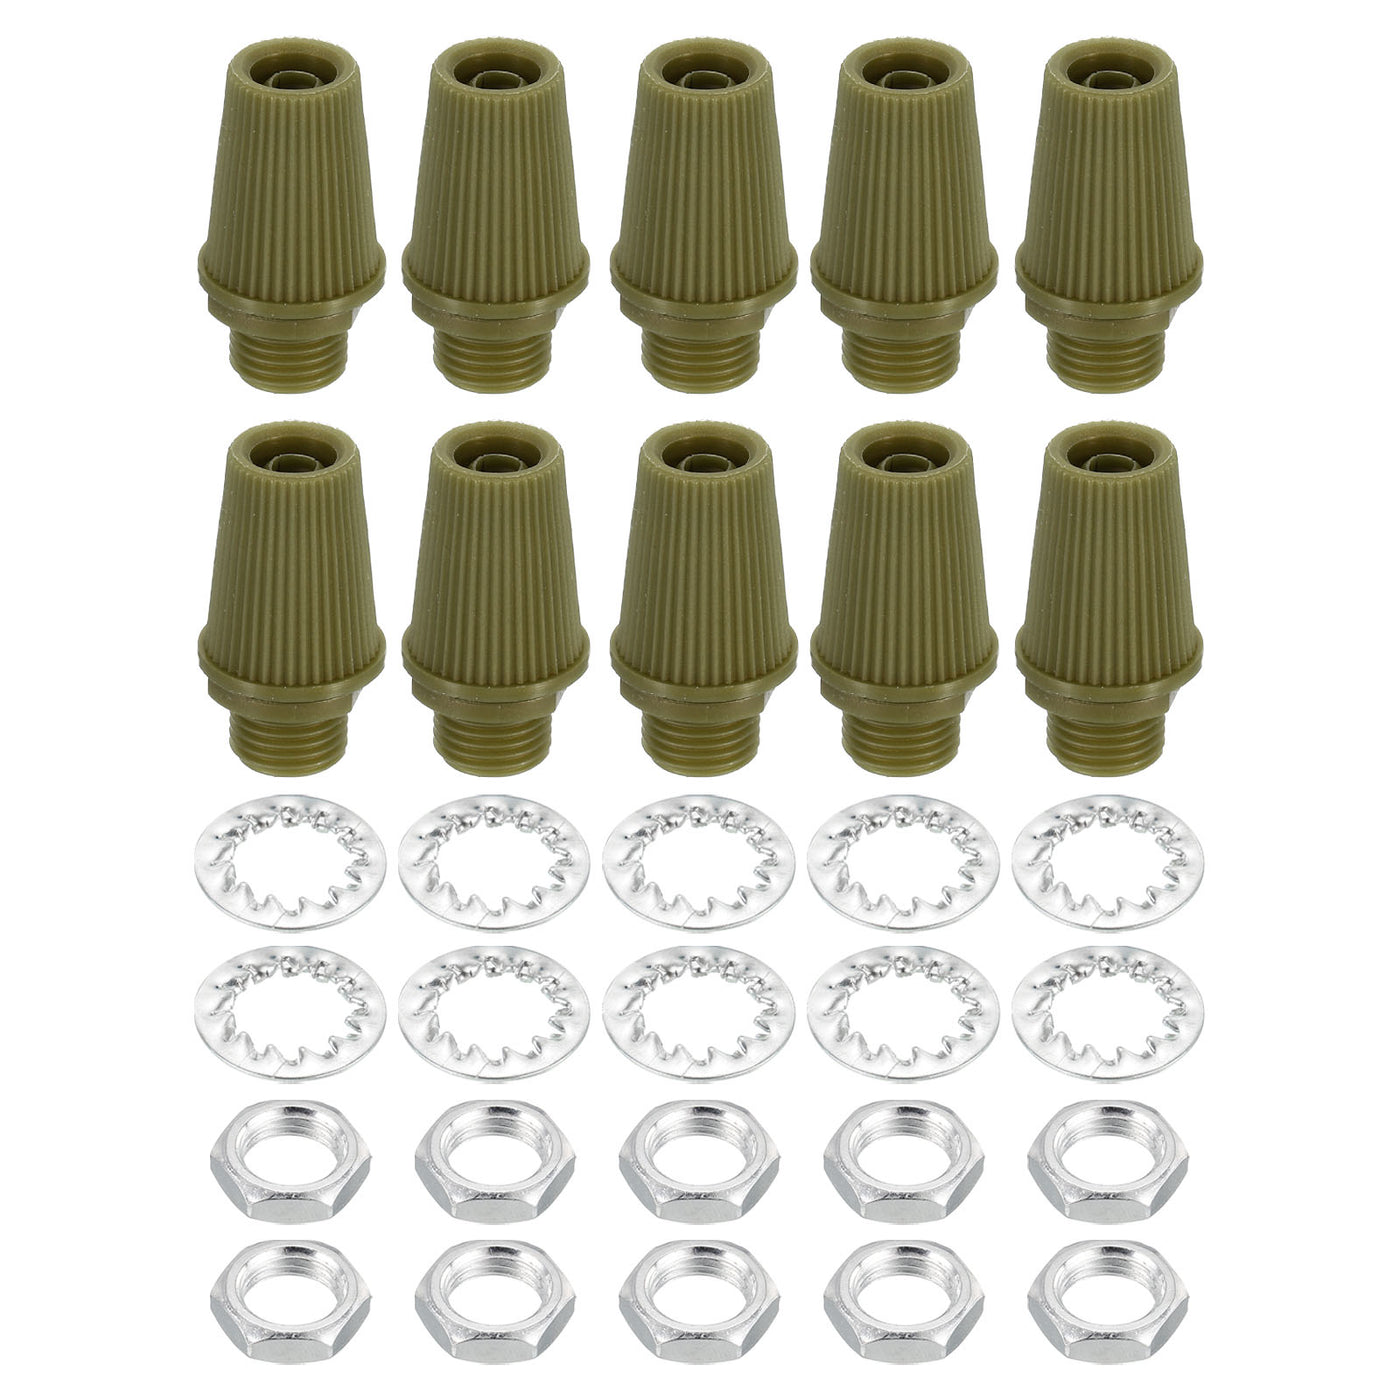 Harfington Lighting Cord Grips Connector,Carbon Steel Light Cable Glands,10Pcs,Green